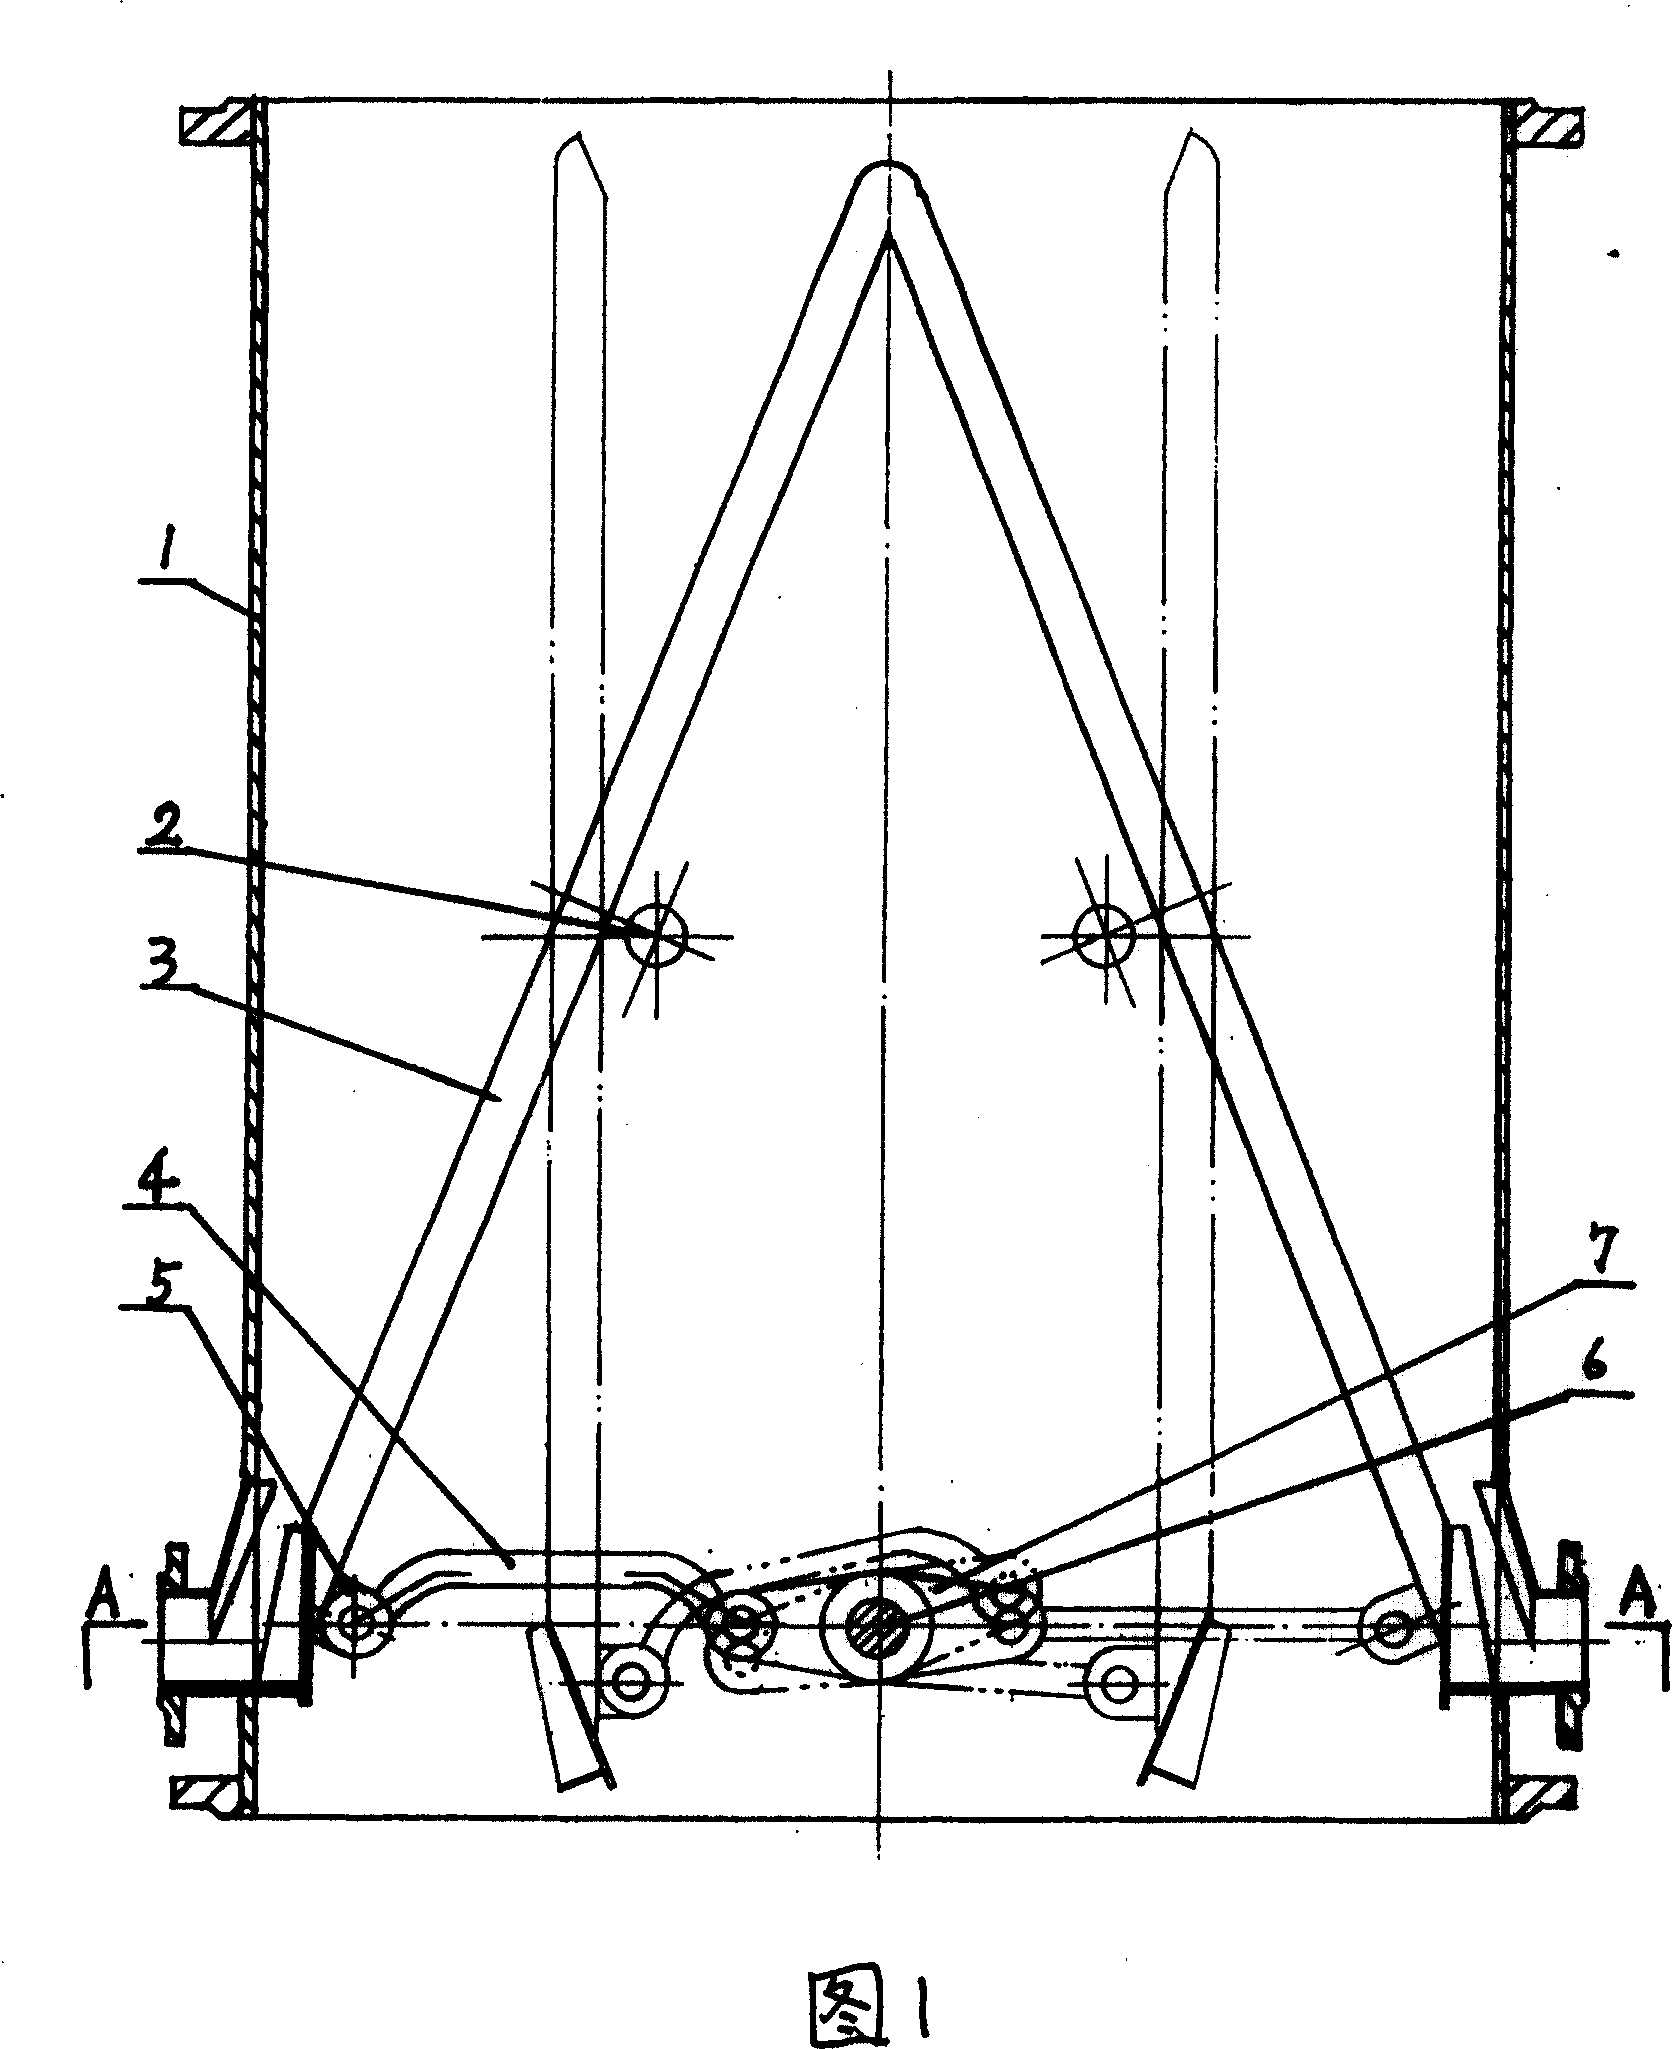 Crank connecting rod type ball net drawing device